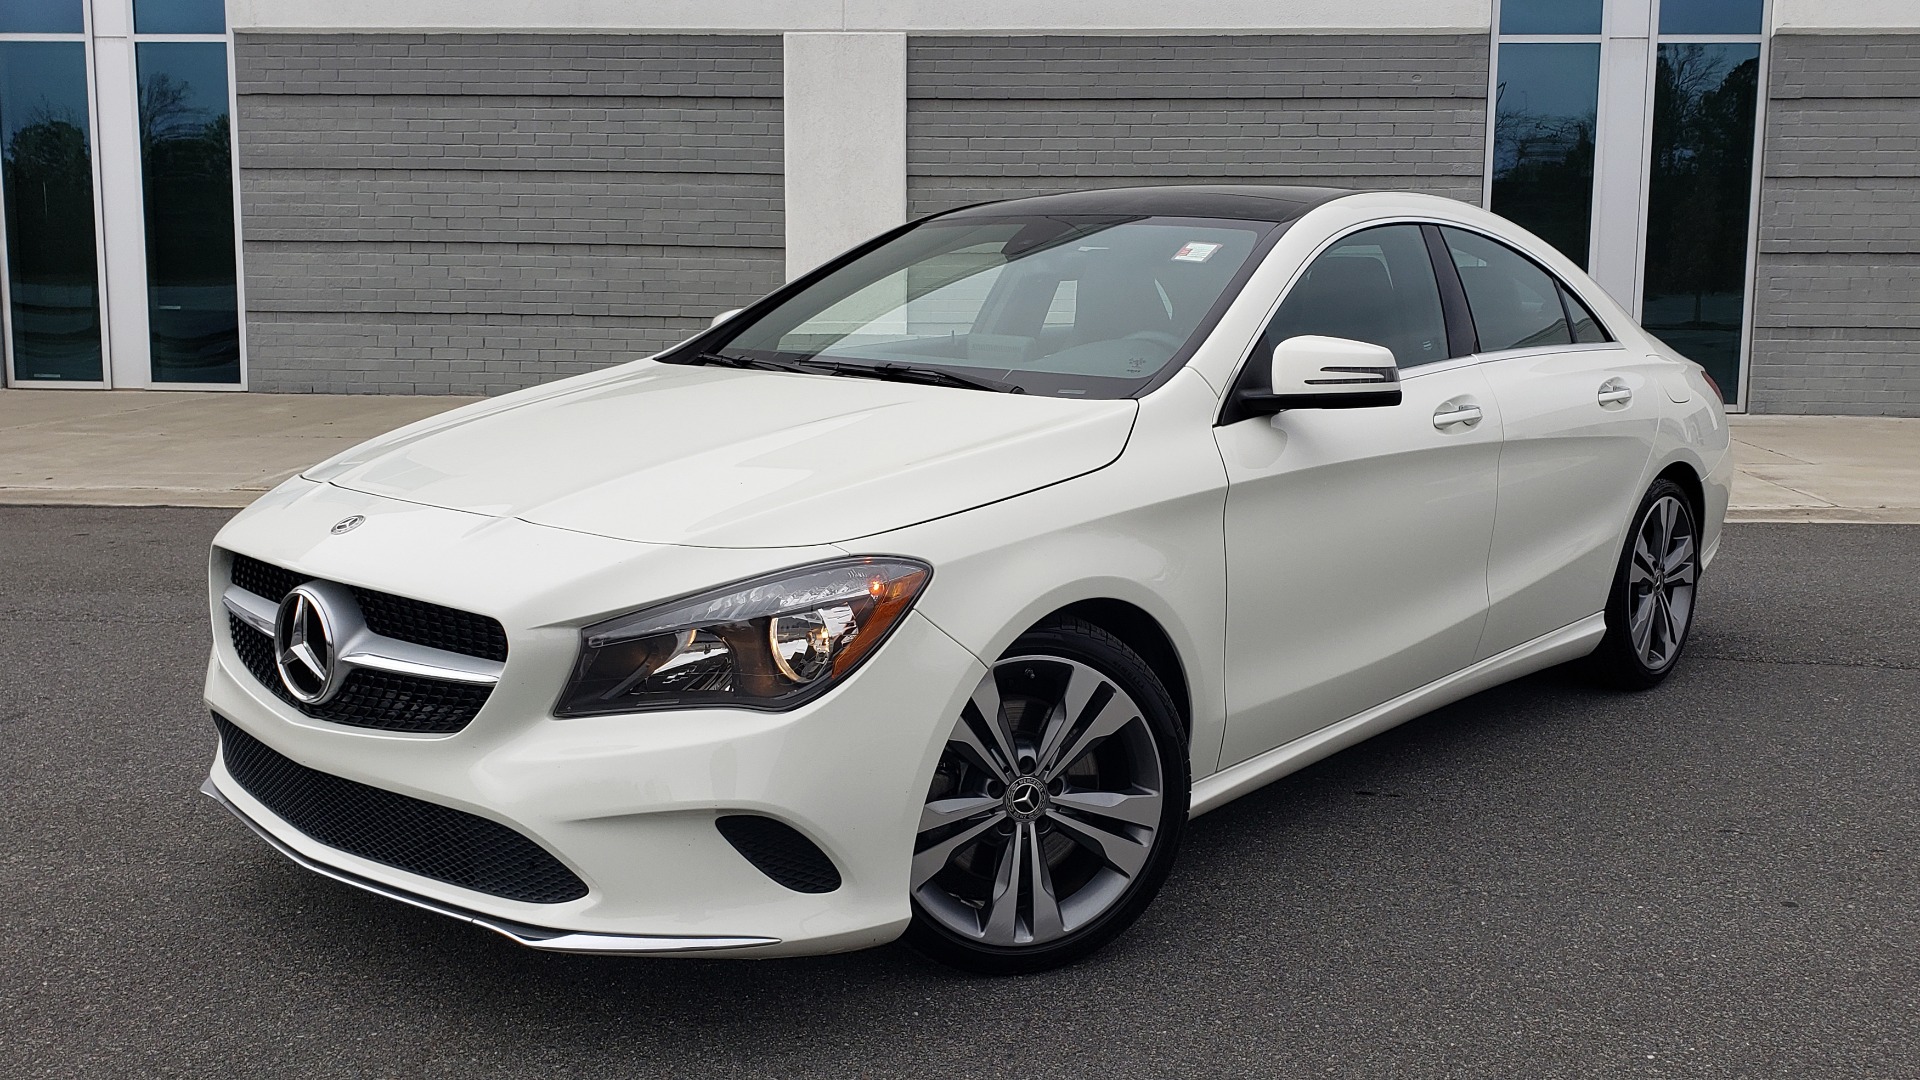 Used 2018 Mercedes-Benz CLA 250 PREMIUM / NAV / PANO-ROOF / APPLE CARPLAY / REARVIEW for sale Sold at Formula Imports in Charlotte NC 28227 1